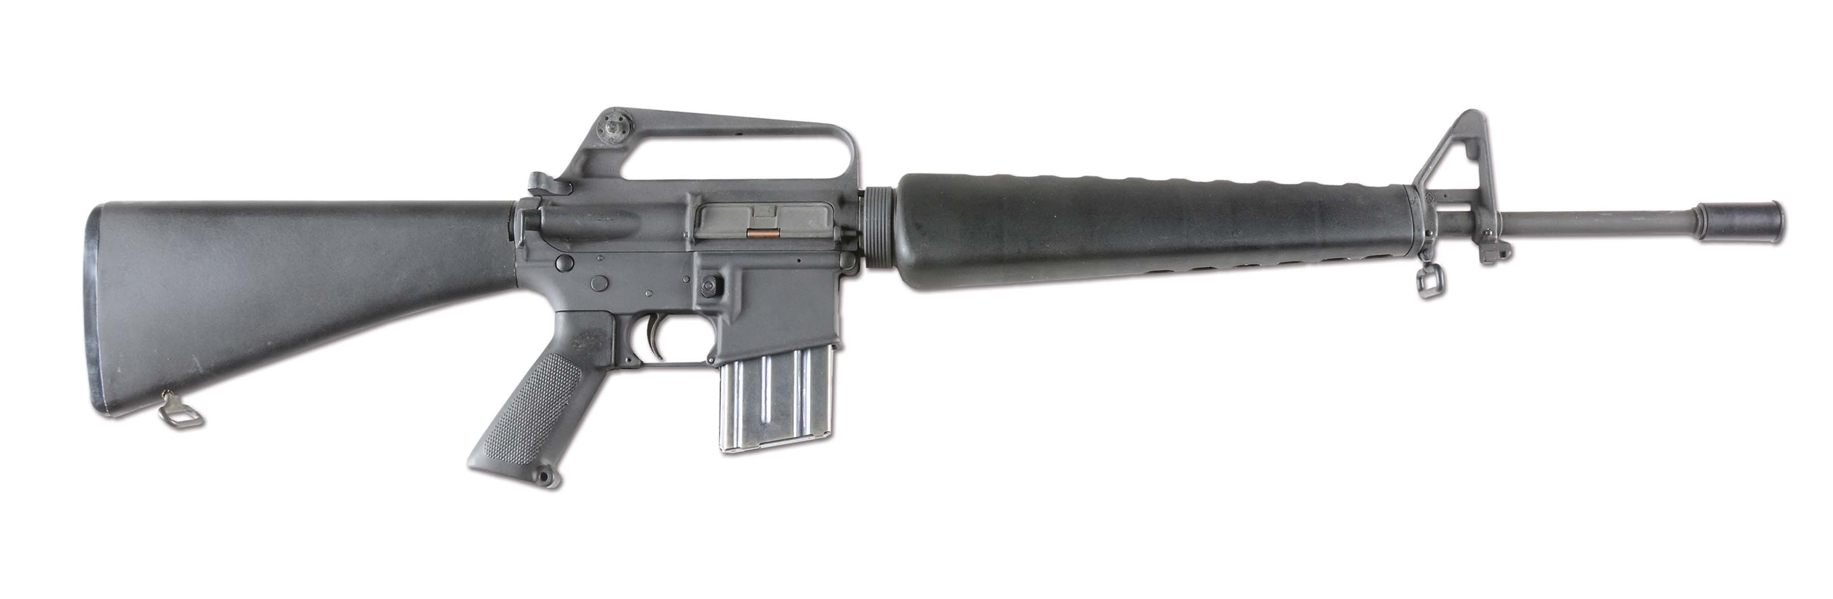 (N) EXCEPTIONAL HIGH CONDITION UNFIRED COLT M16A1 MACHINE GUN (FULLY TRANSFERABLE).